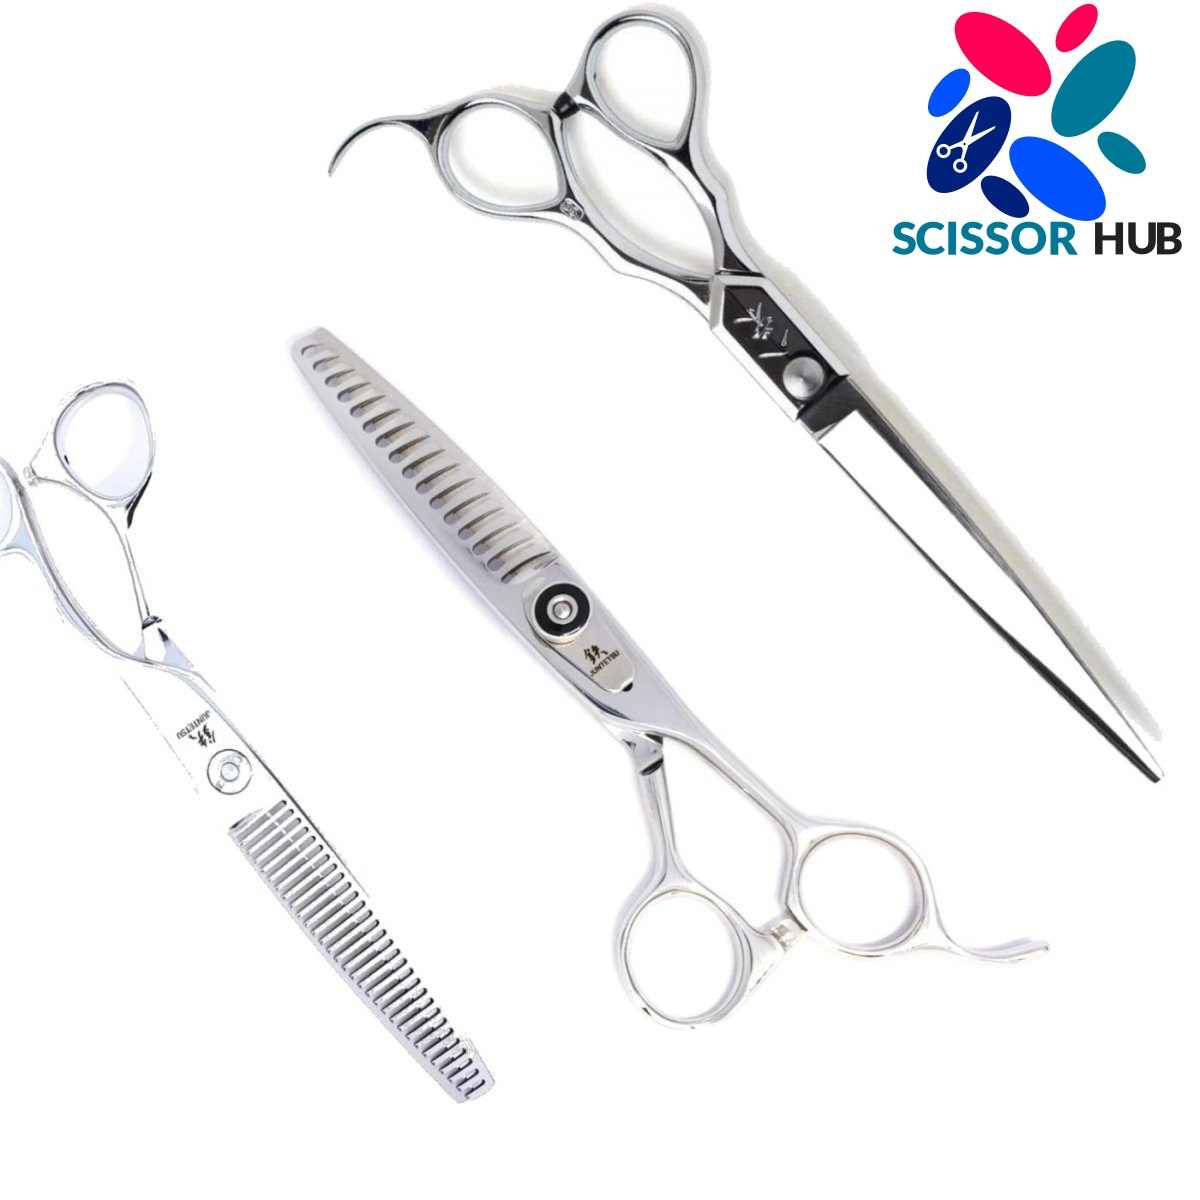 5 Ways To Sharpen Hair Scissors: At Home Or Work Like A